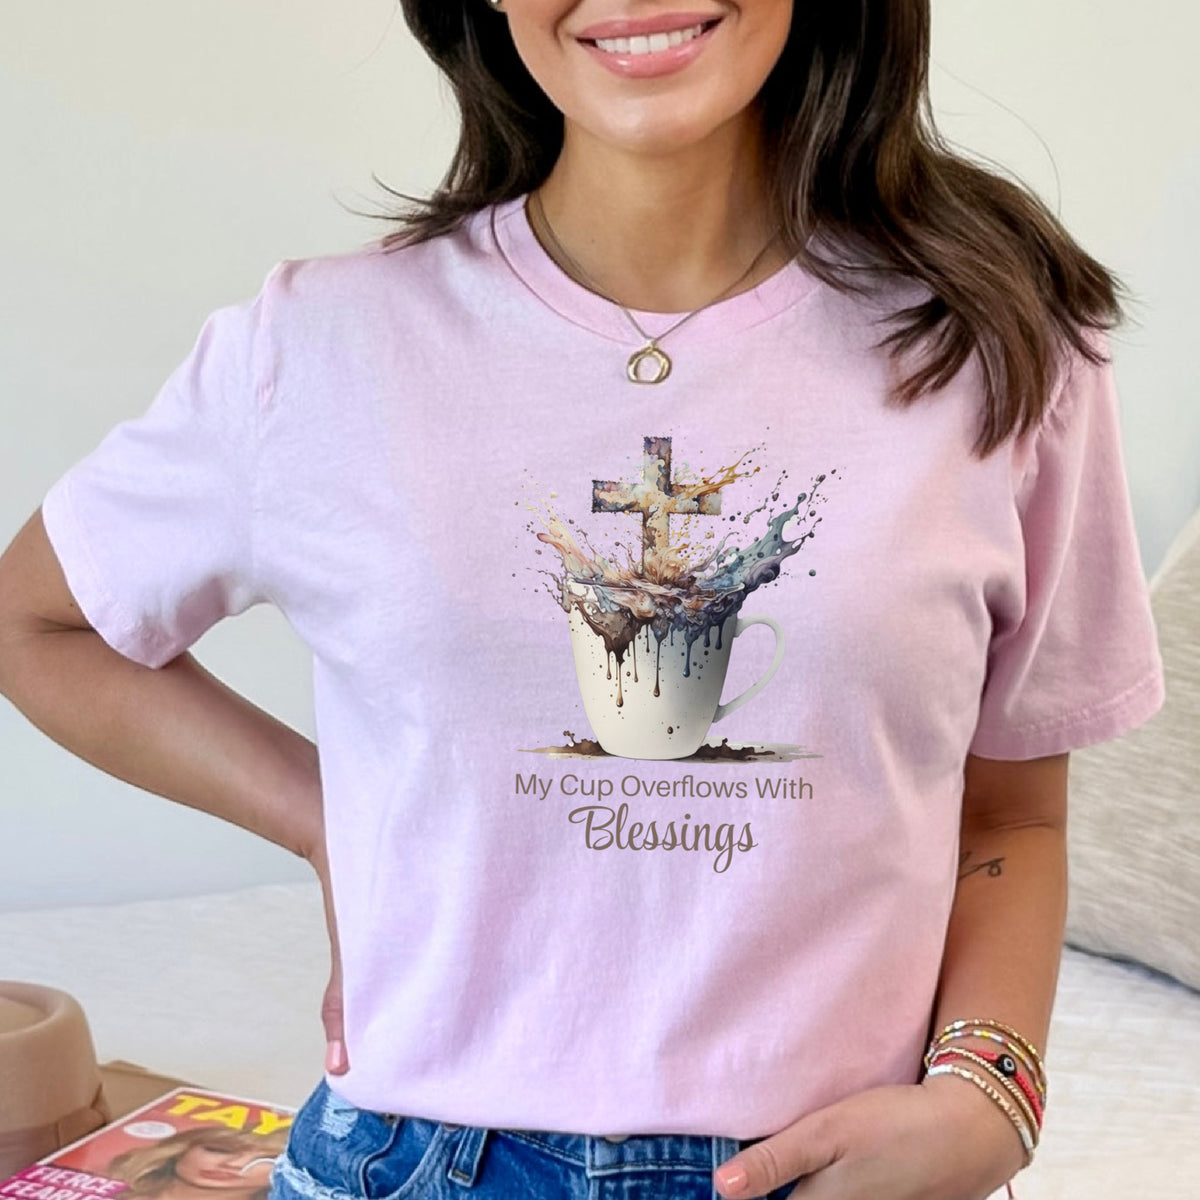 My Cup Overflows With Blessings - Women's Christian T-Shirt